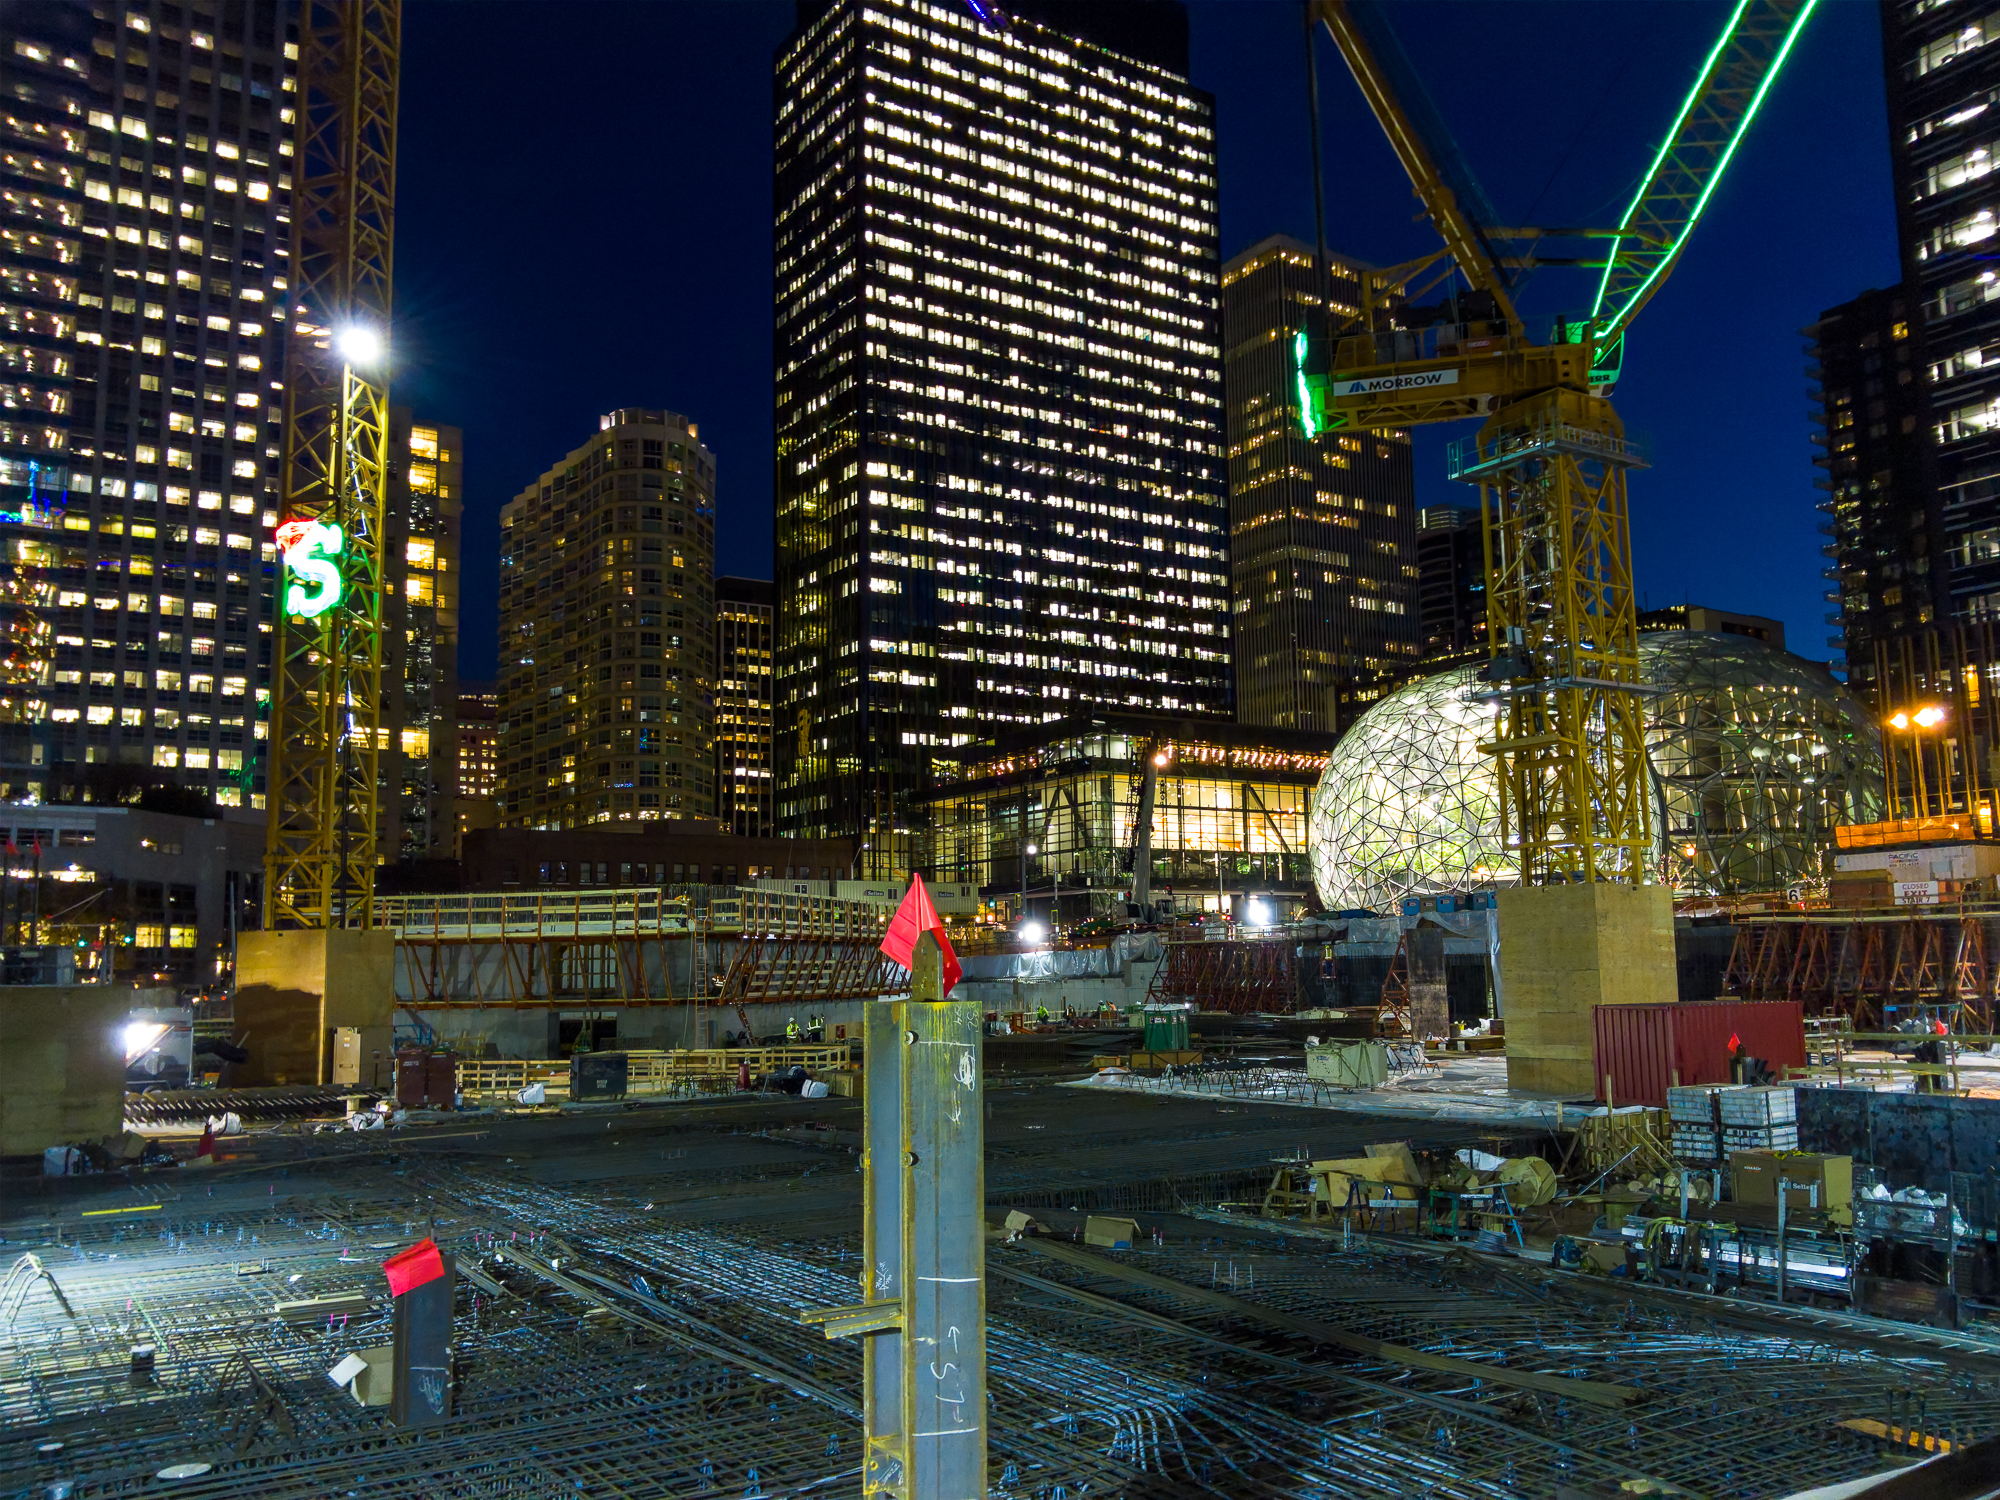 Construction Site in Seattle with the L16